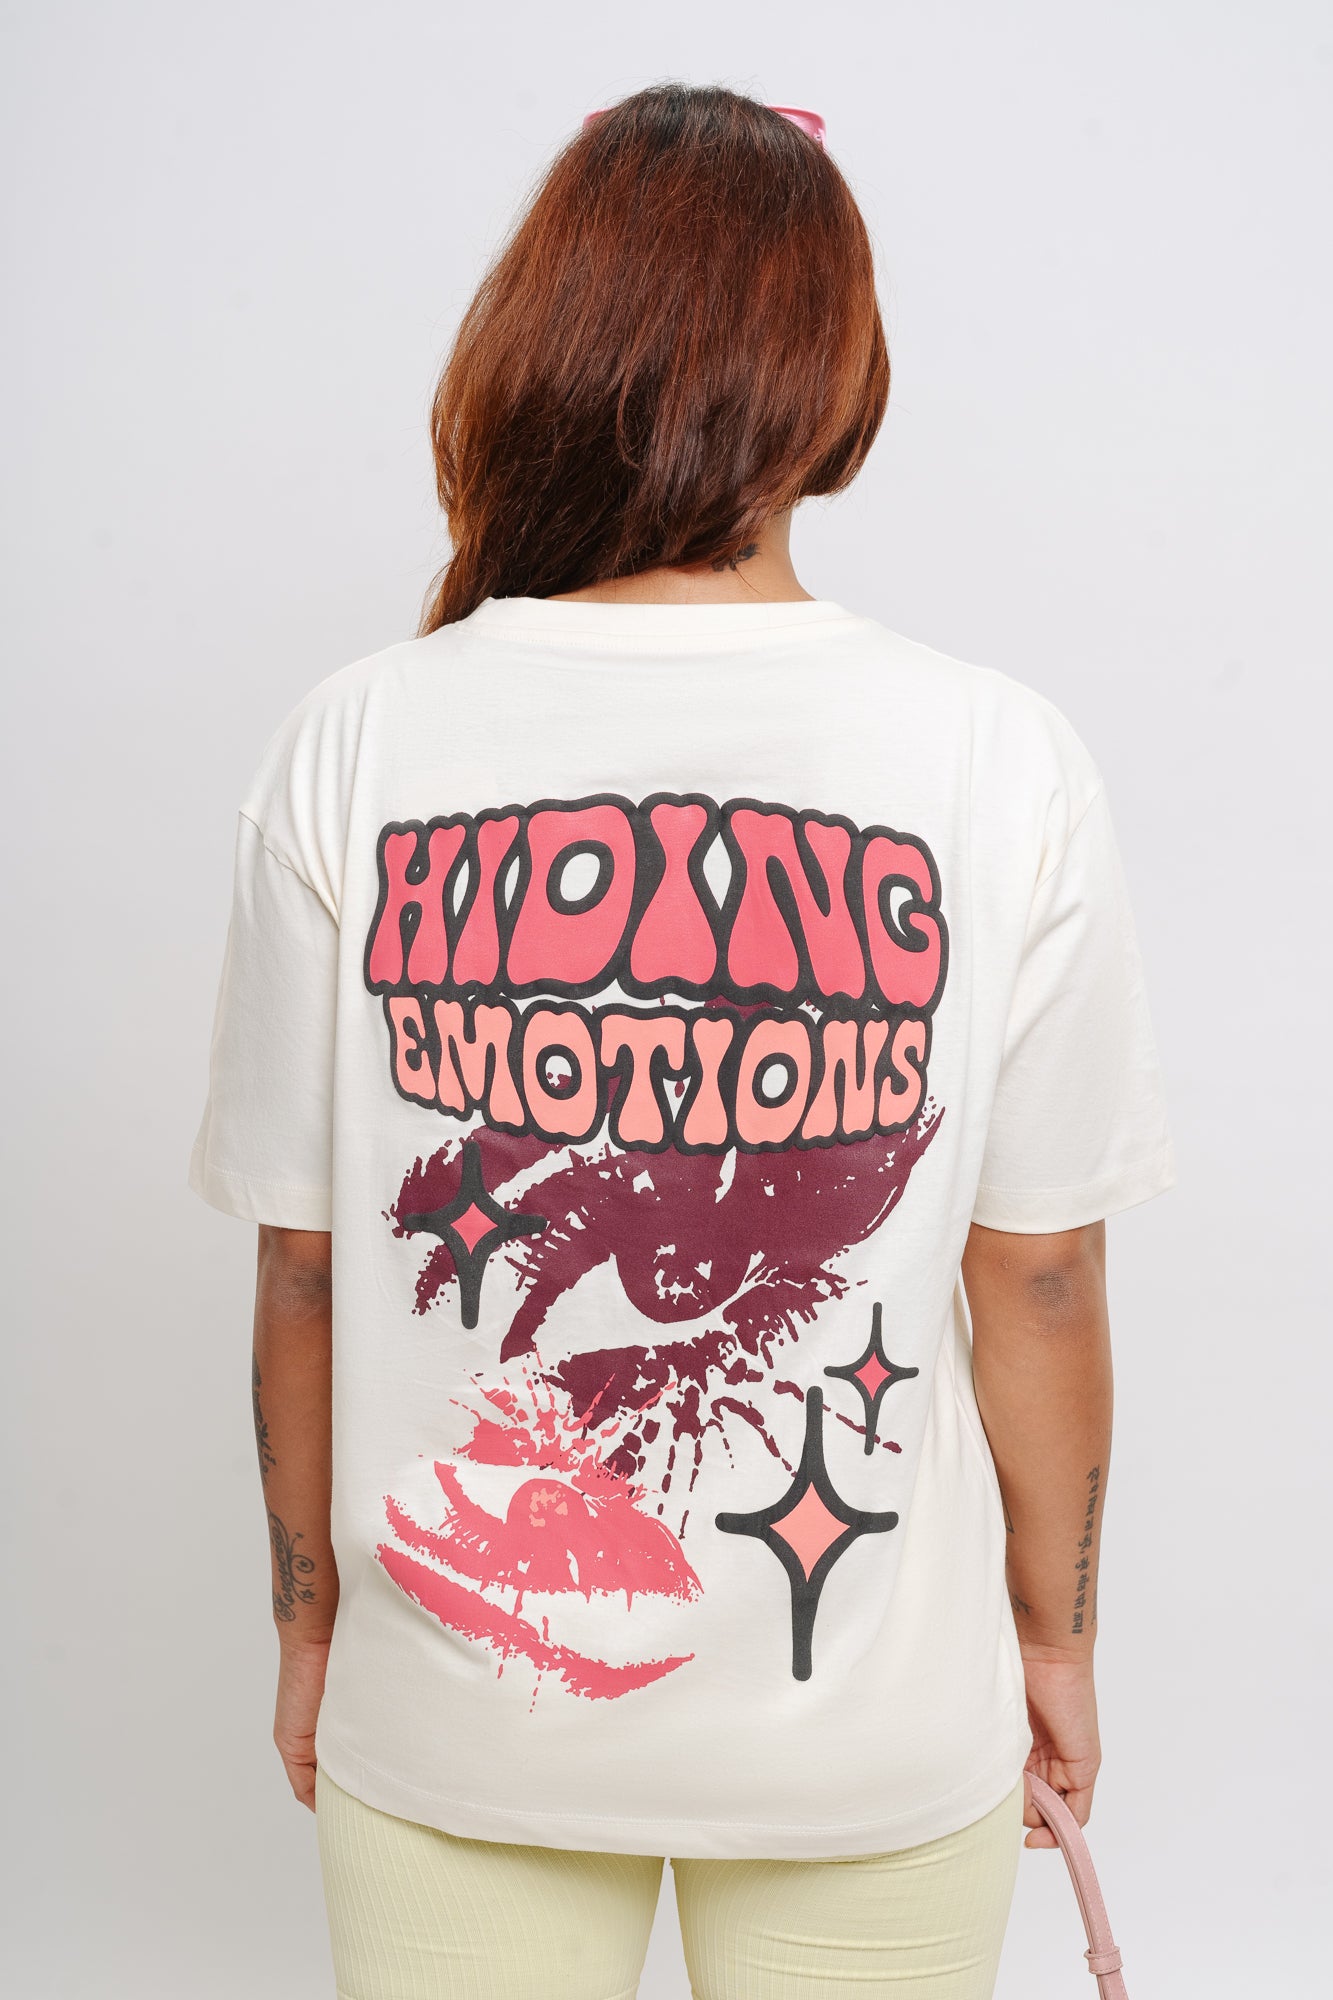 HIDING EMOTIONS OVERSIZED TEES